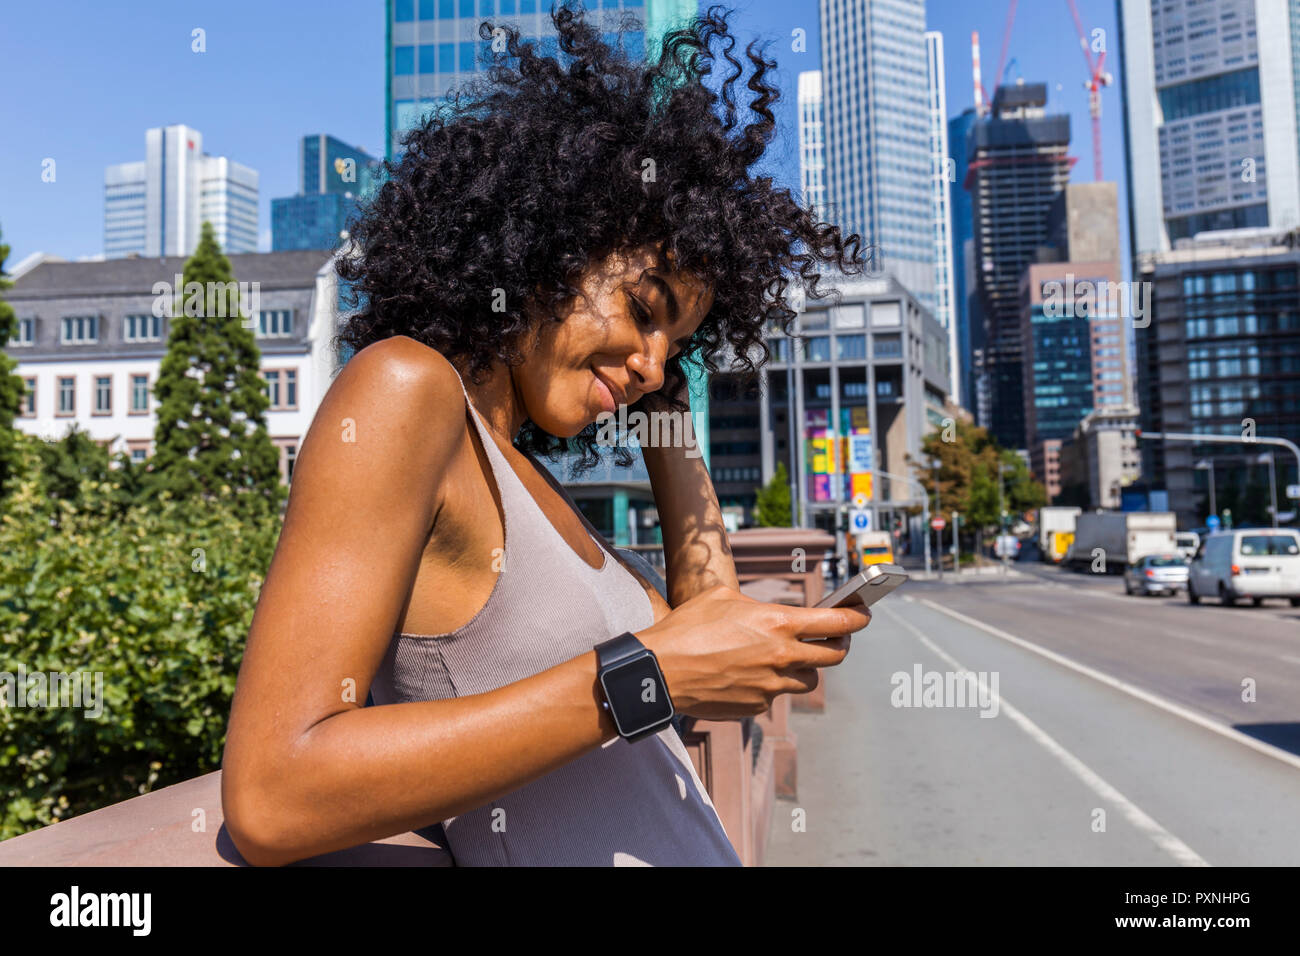 Germany, Frankfurt, portrait of smiling young woman with curly hair using cell phone in the city Stock Photo